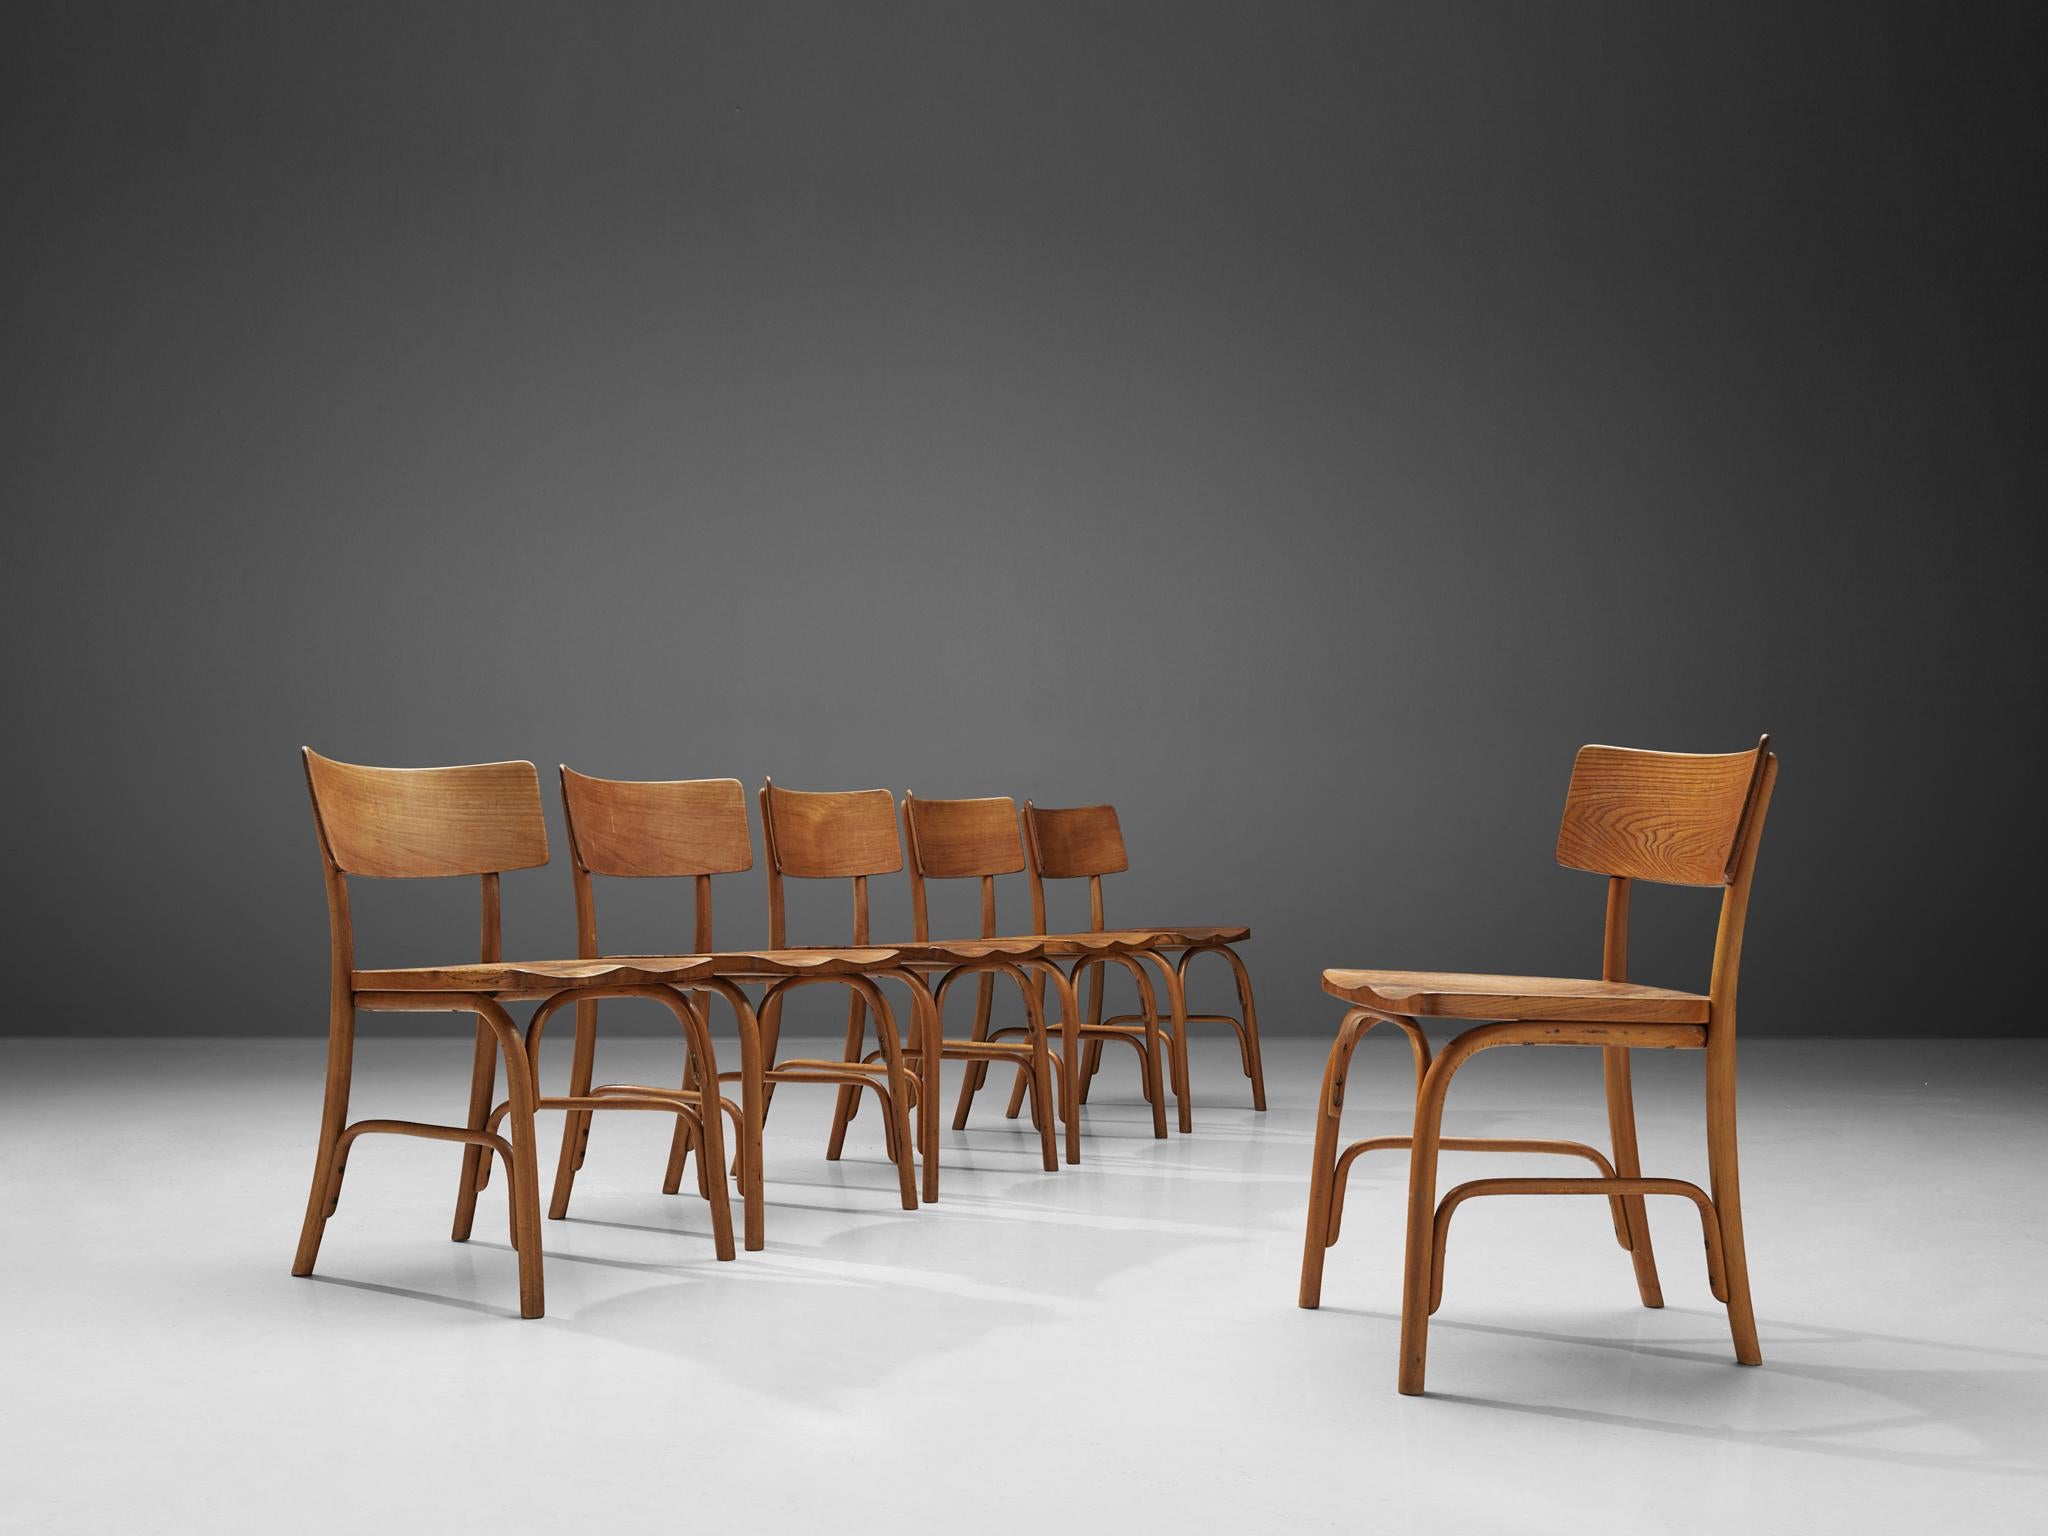 Frits Schlegel for Fritz Hansen, set of six 'Husum' chairs, elm, Denmark, 1930

Danish designer Frits Schlegel created the 'Husum' chair which got manufactured by Fritz Hansen in different editions. This model made out of beech features a